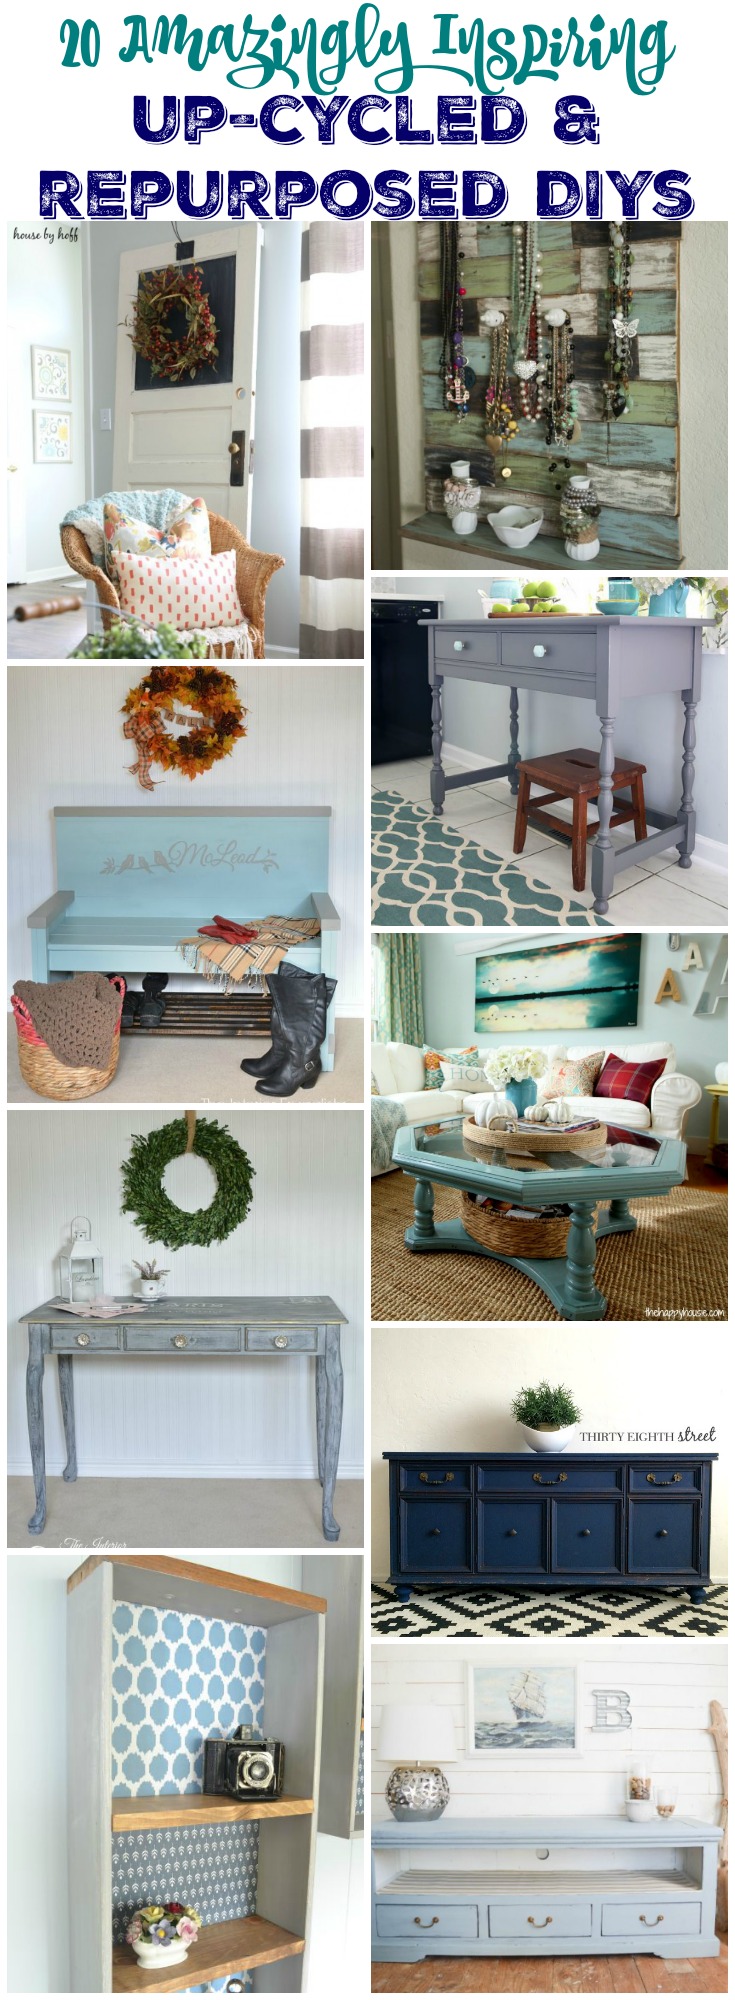 You are going to be totally inspired by these awesome up cycled and repurposed projects at thehappyhousie.com